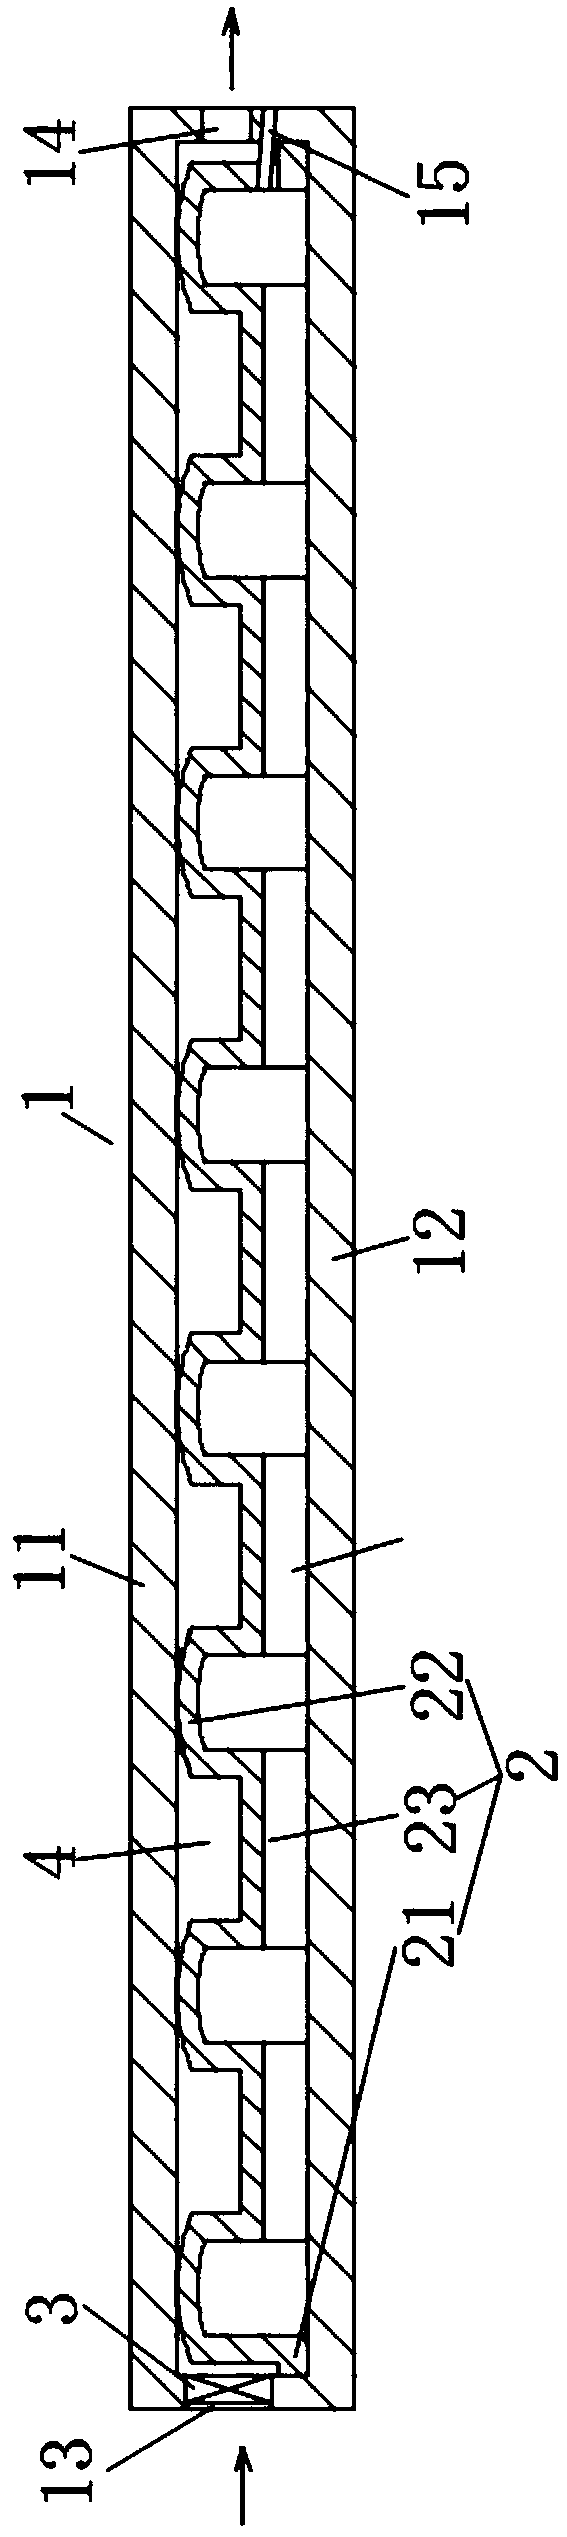 Adjustable-temperature inflatable cushion core and manufacturing method thereof